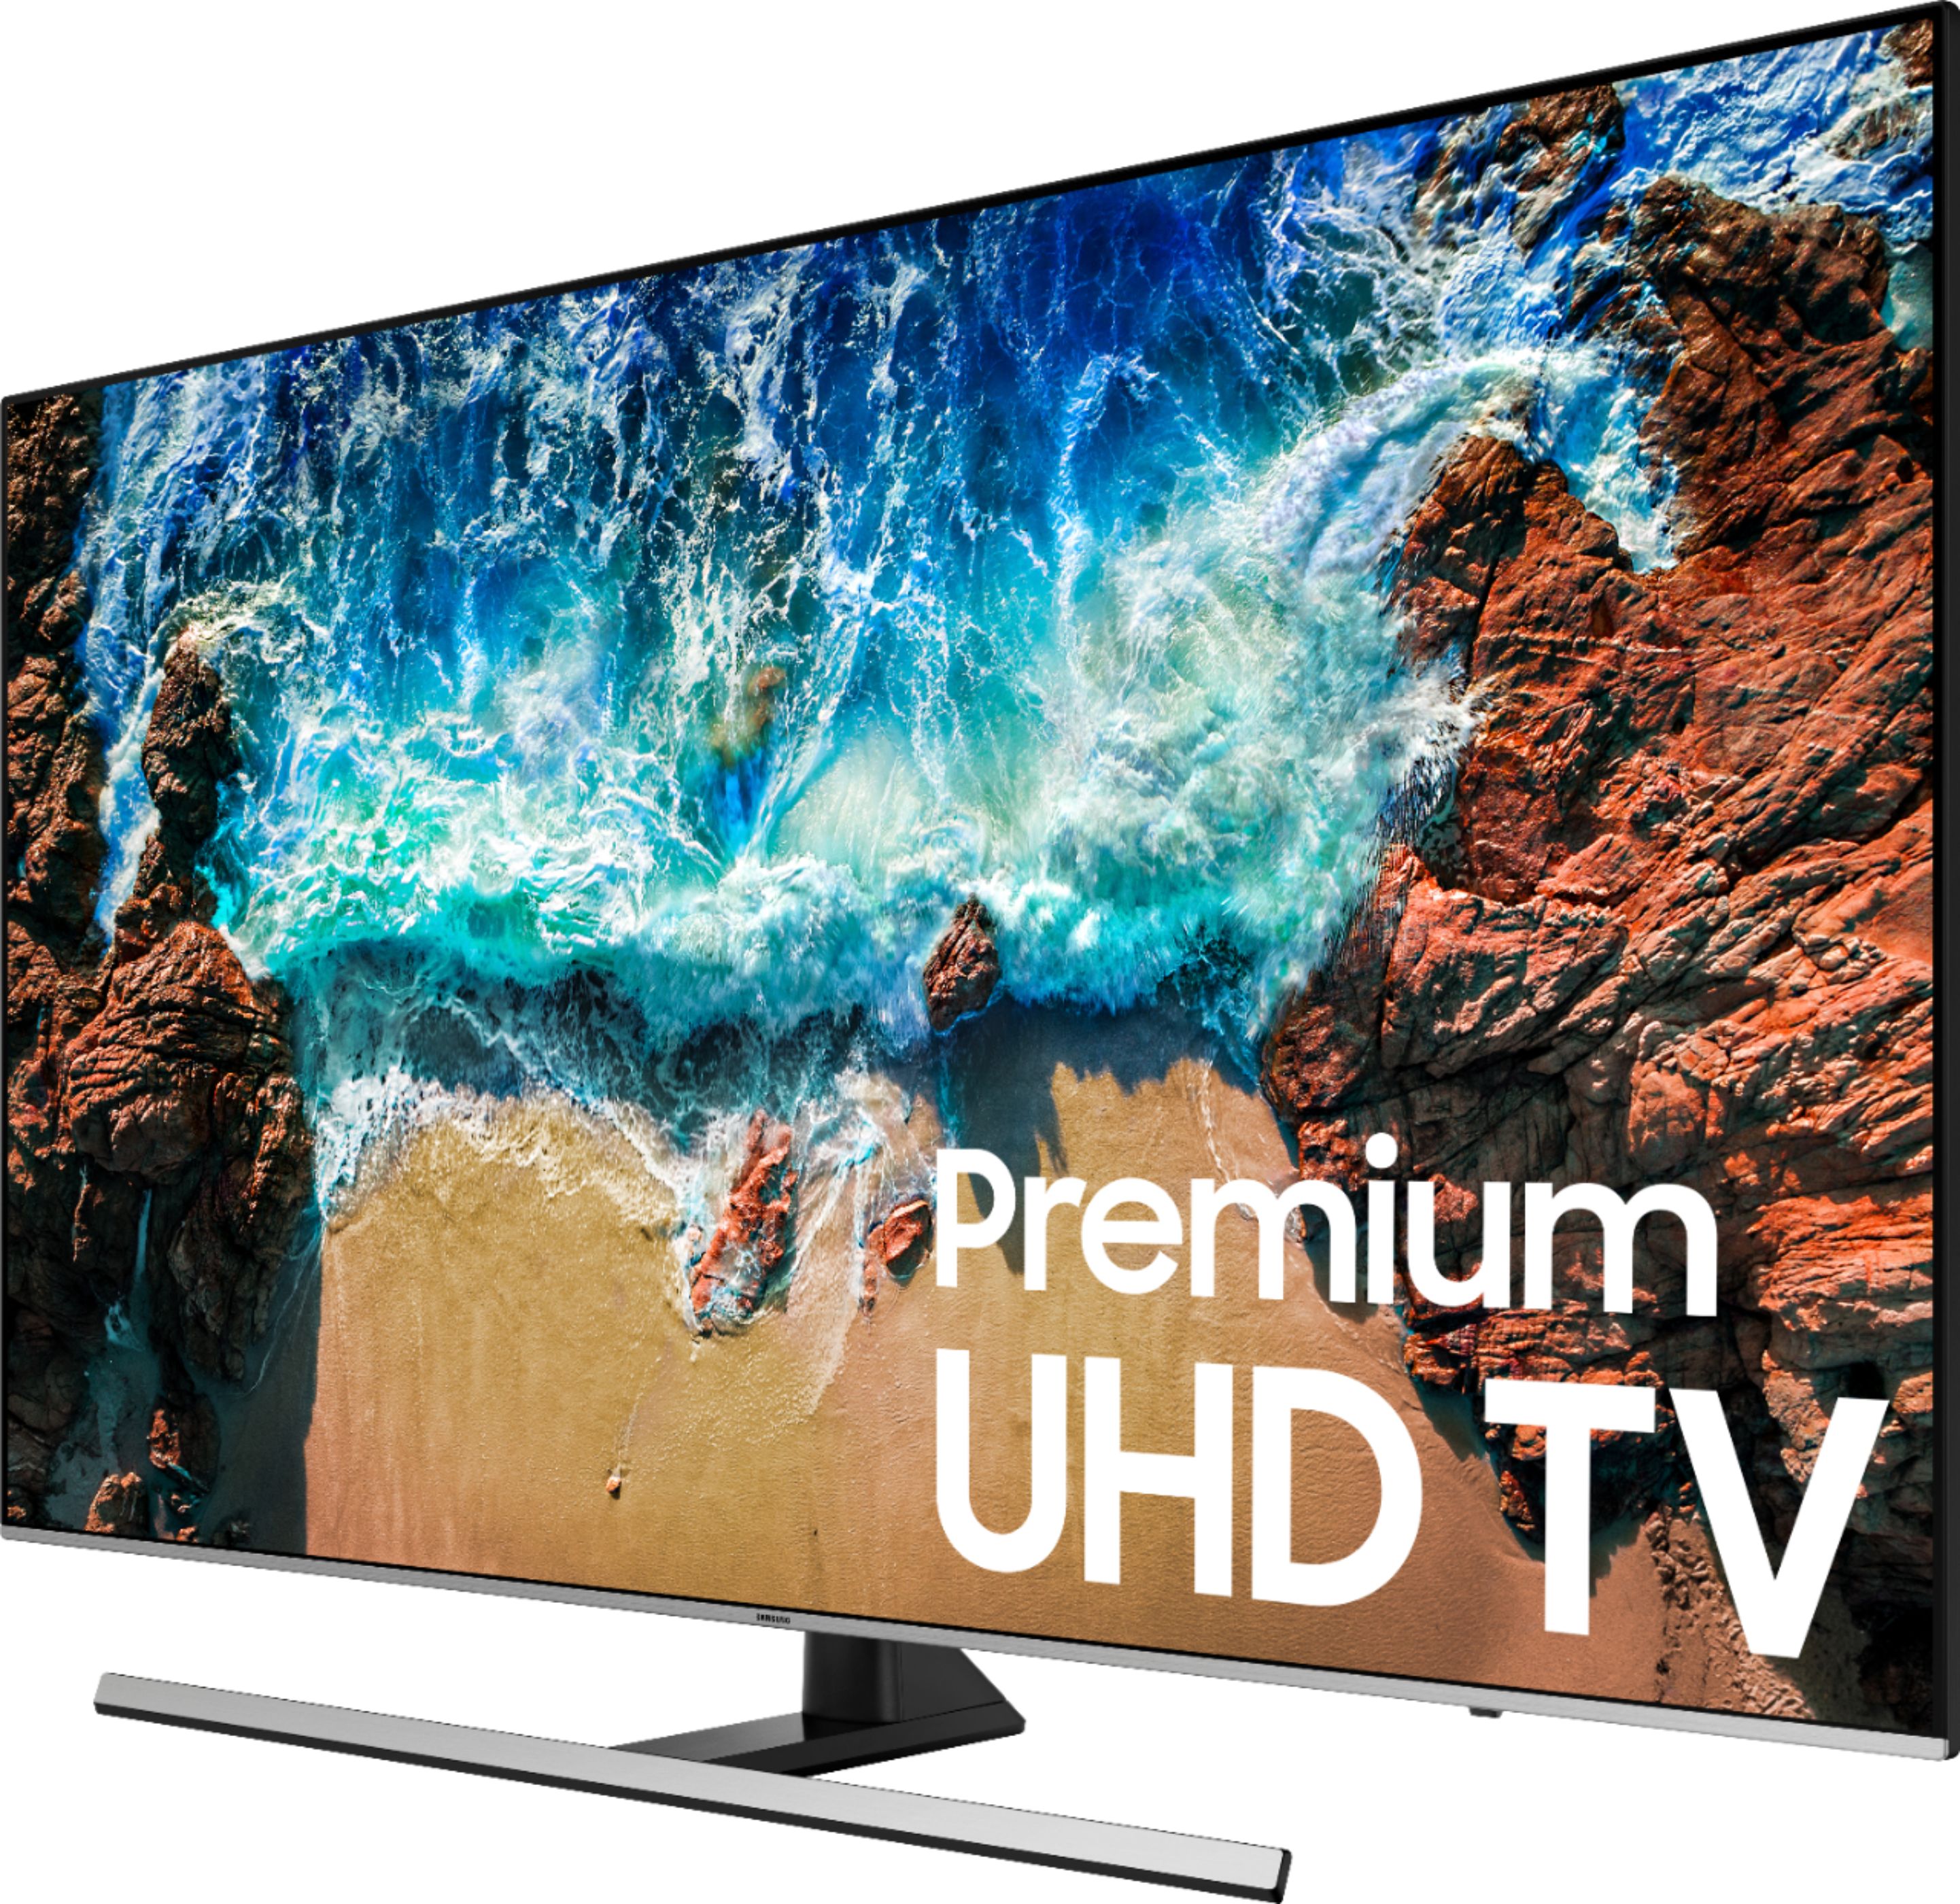 cut back Martin Luther King Junior Championship Best Buy: Samsung 55" Class LED NU8000 Series 2160p Smart 4K UHD TV with  HDR UN55NU8000FXZA